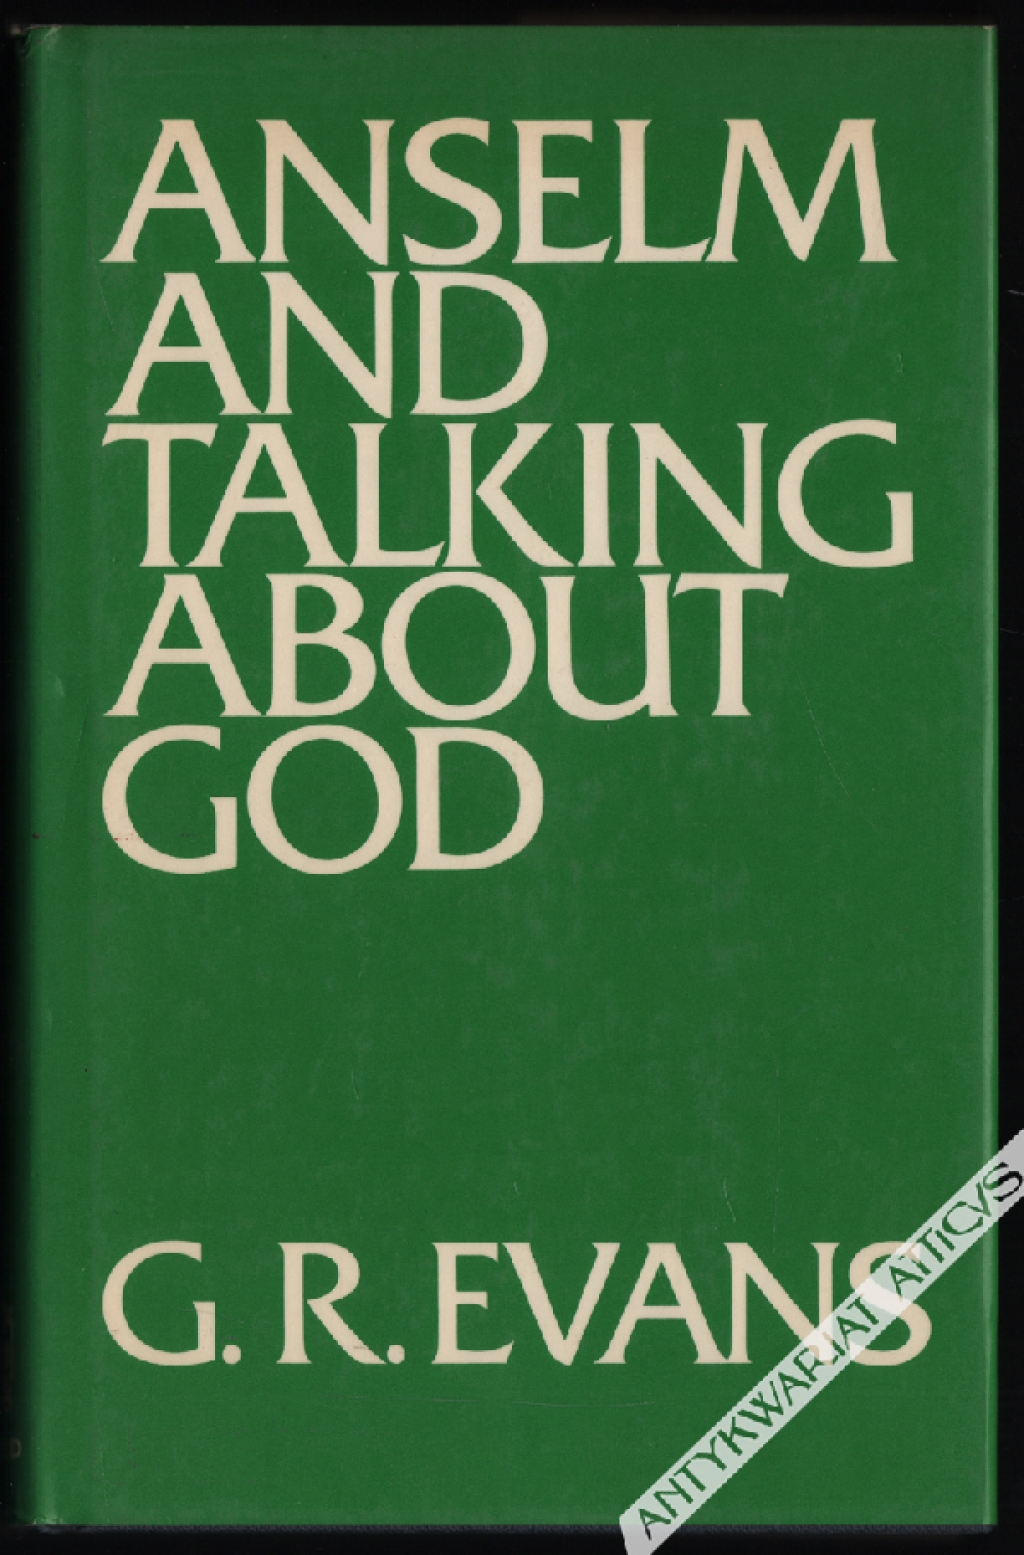 Anselm and Talking About God